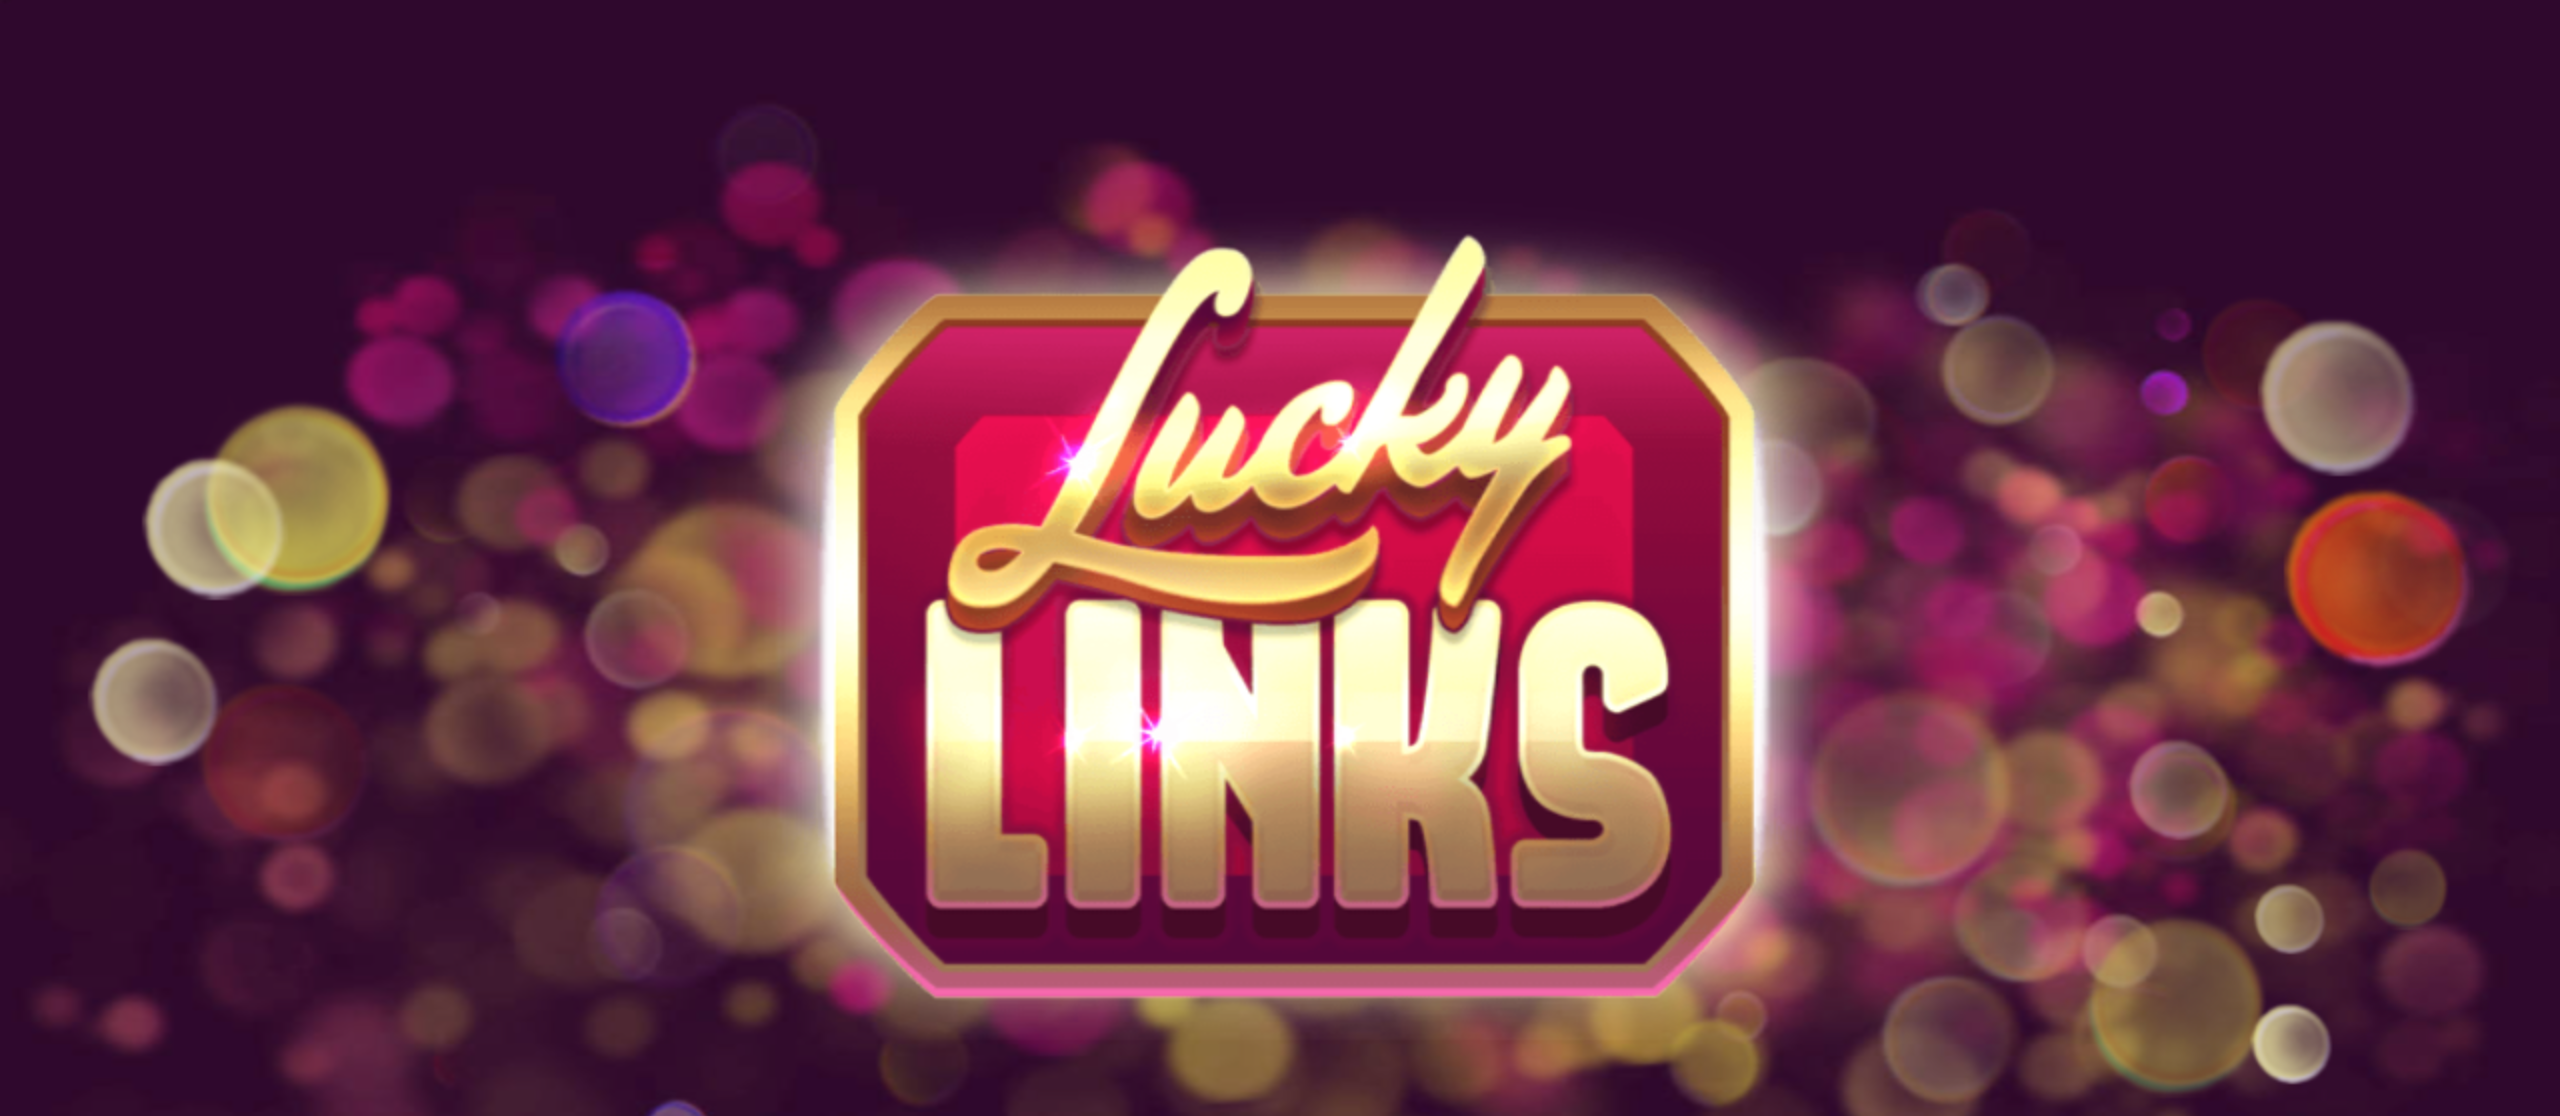 Are you feeling lucky? No? Time to play Lucky Links! 